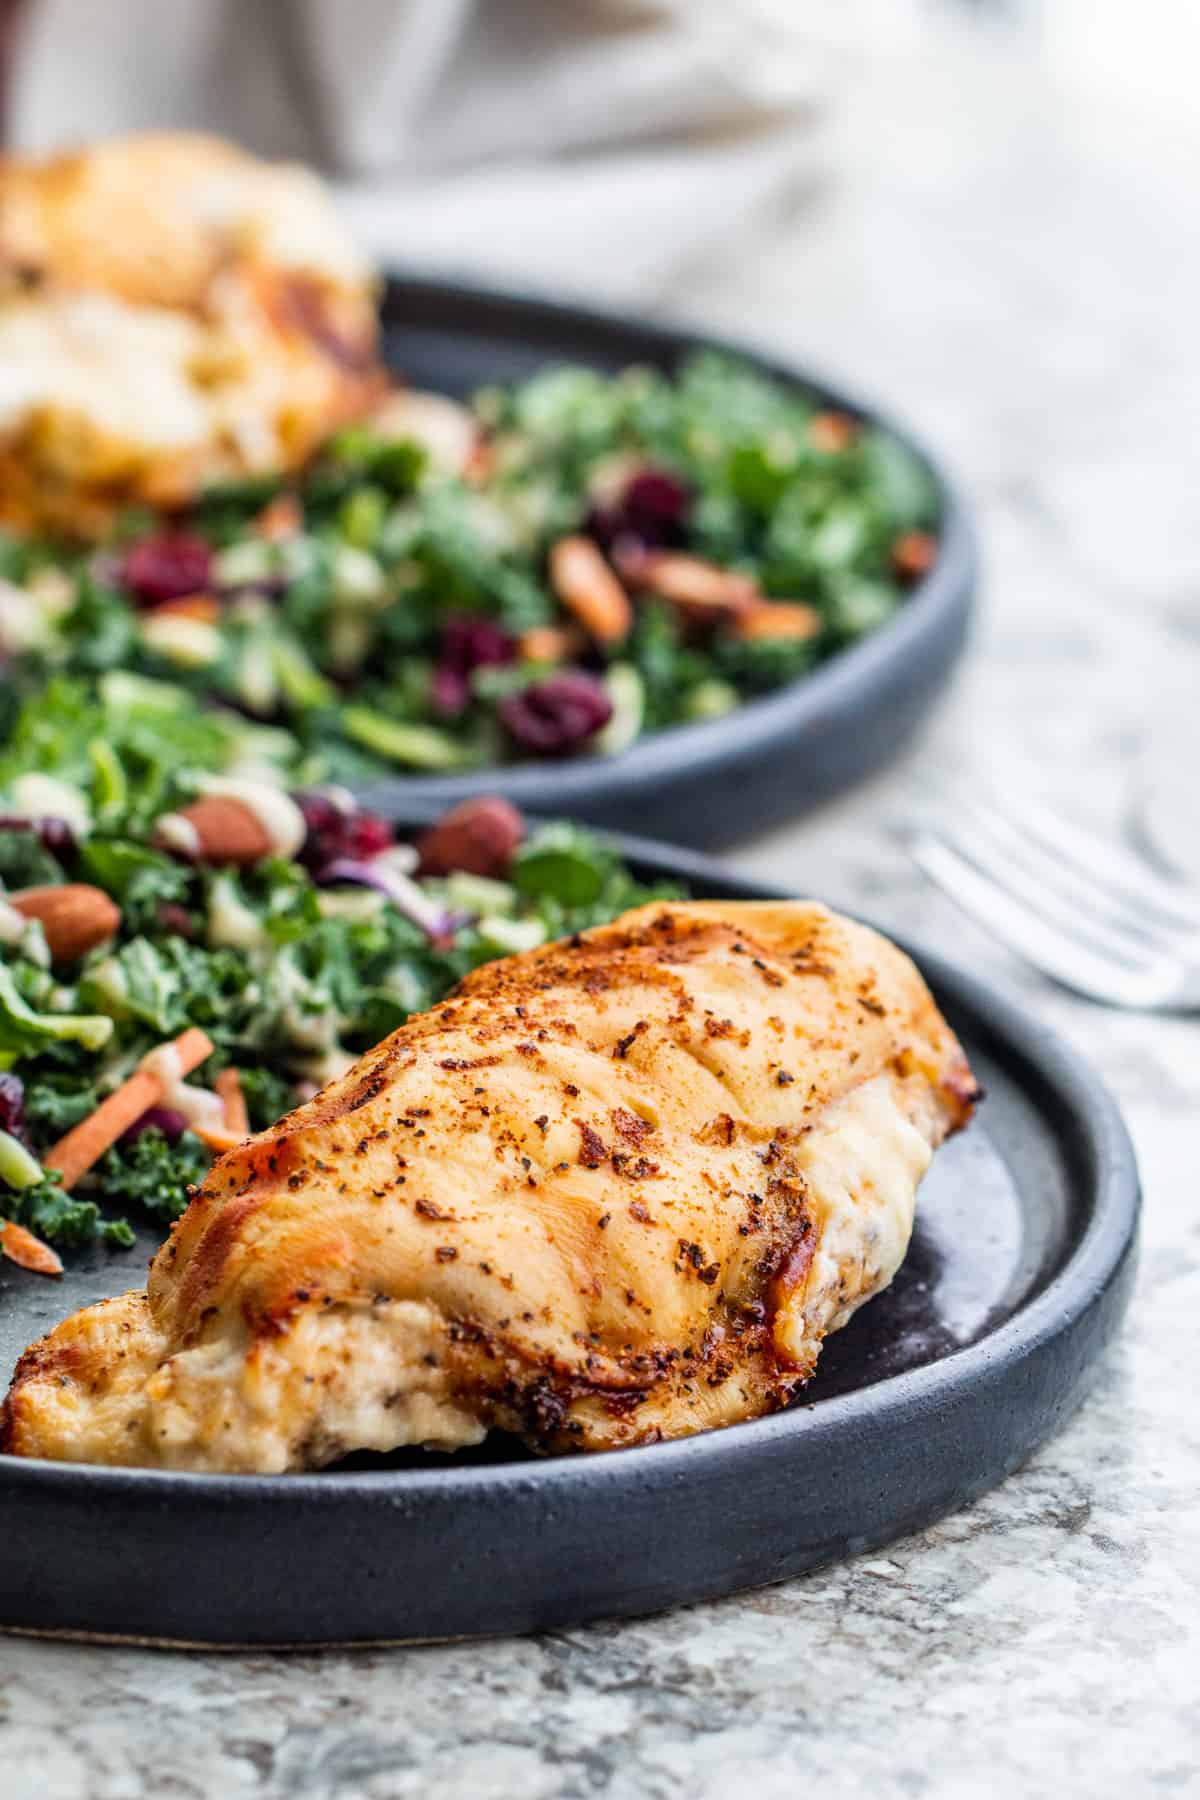 Cheese stuffed chicken on a black plate with side salad on a white counter.